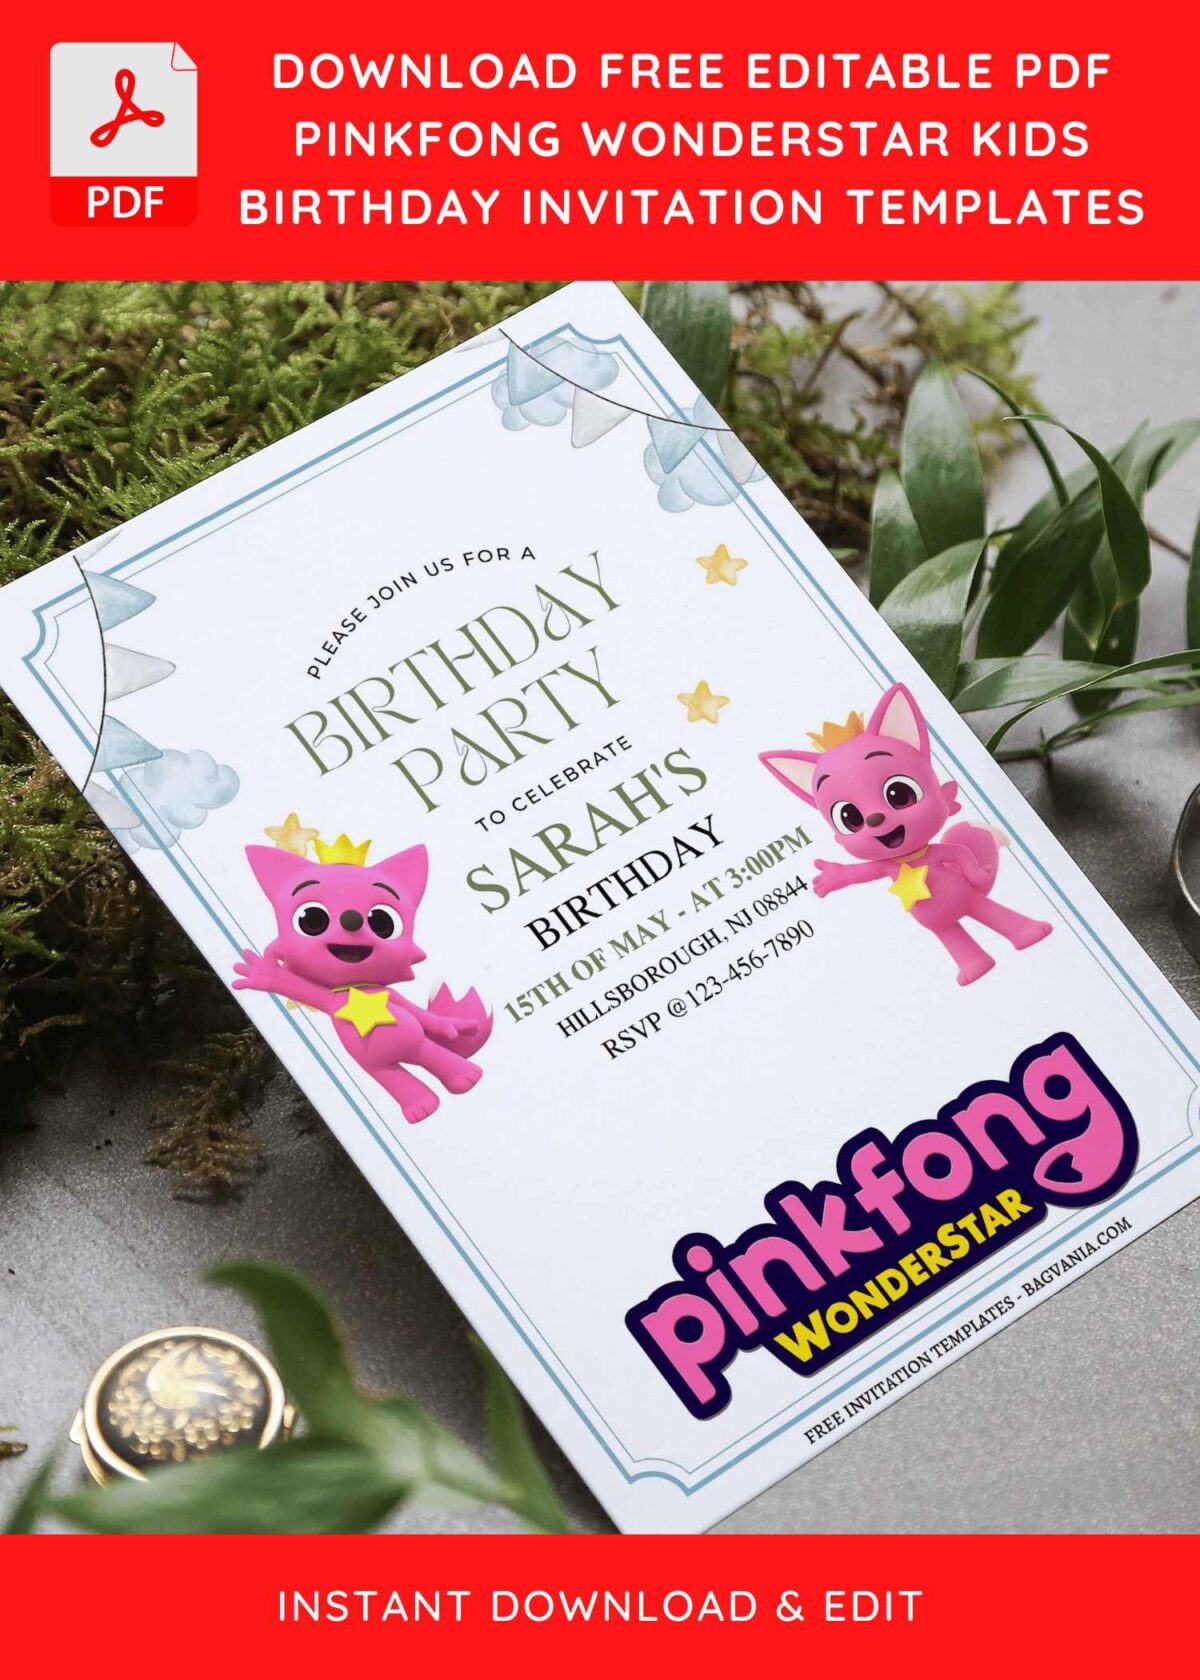 (Free Editable PDF) Adorable Pinkfong Wonderstar Kids Birthday Invitation Templates with catchy wording